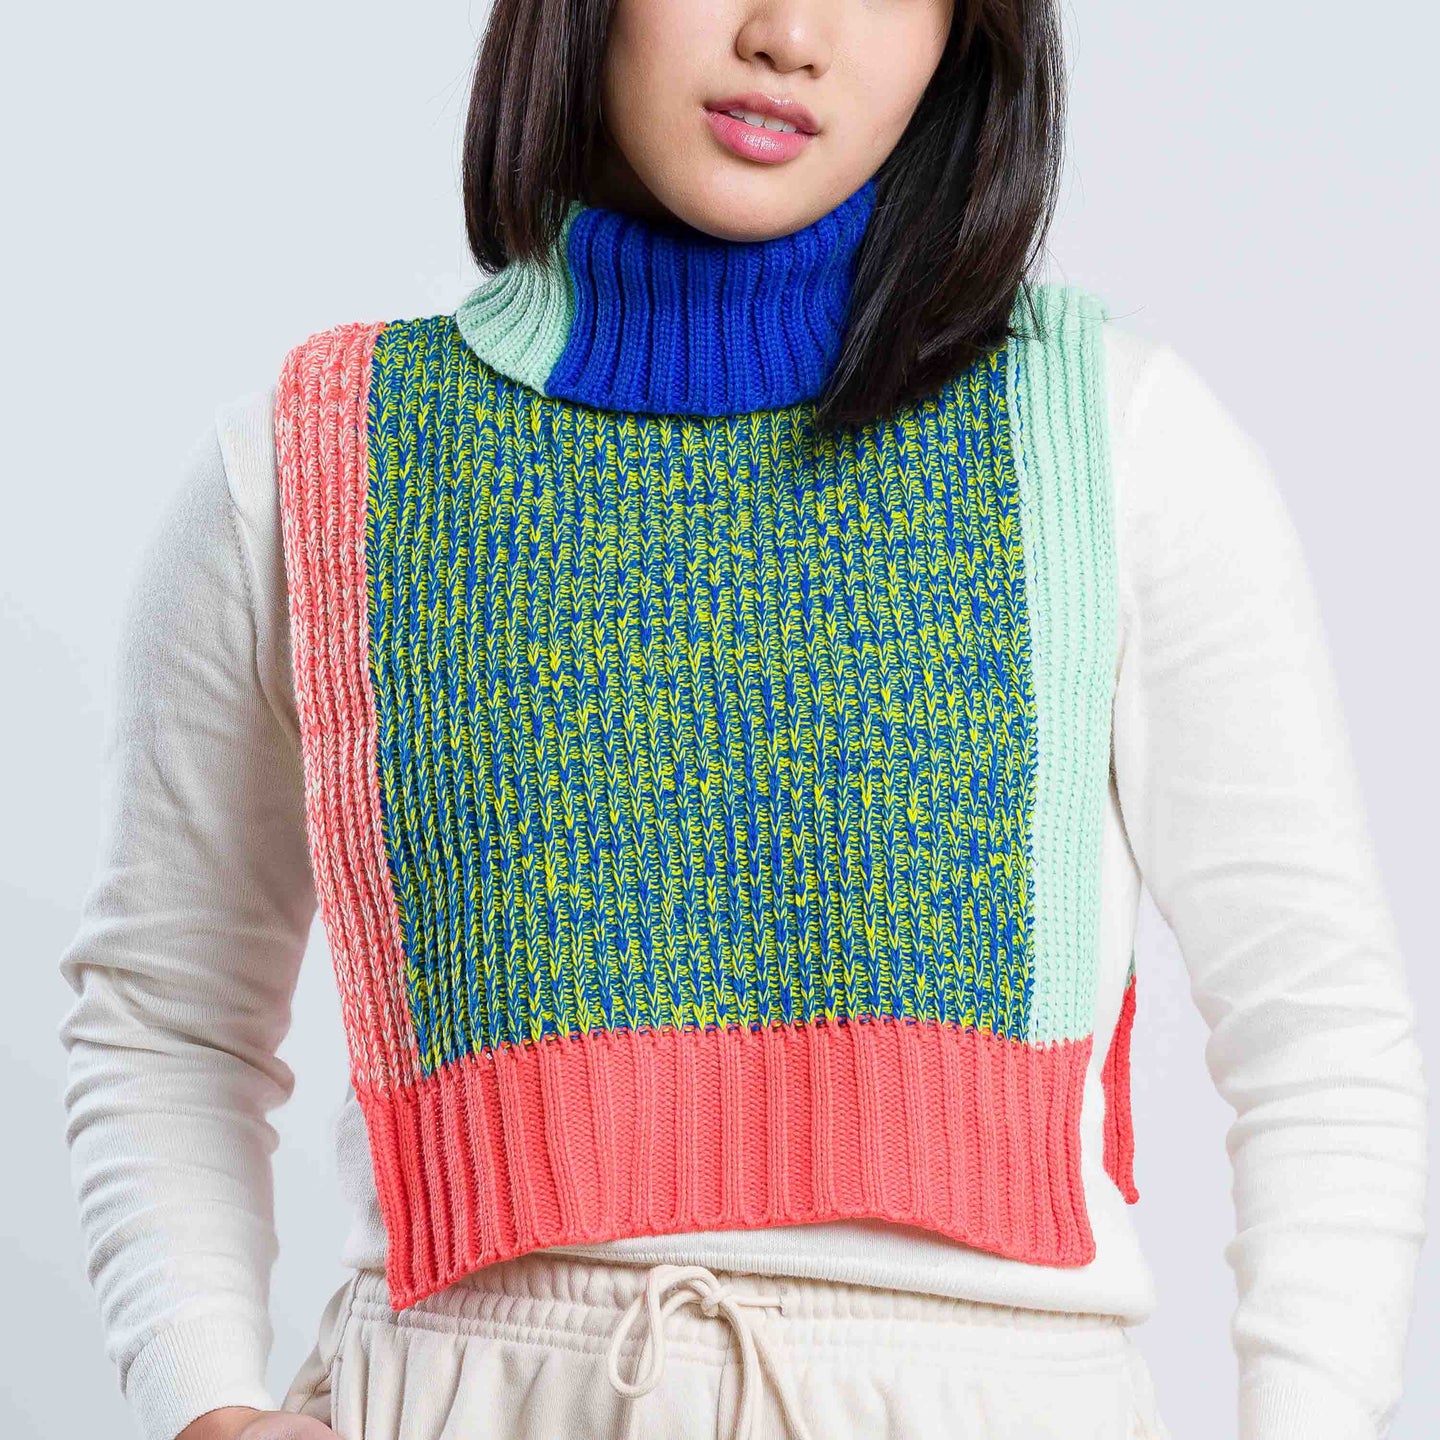 Knit Colorblock Dickie Static Swatch Marled Tabard Turtleneck